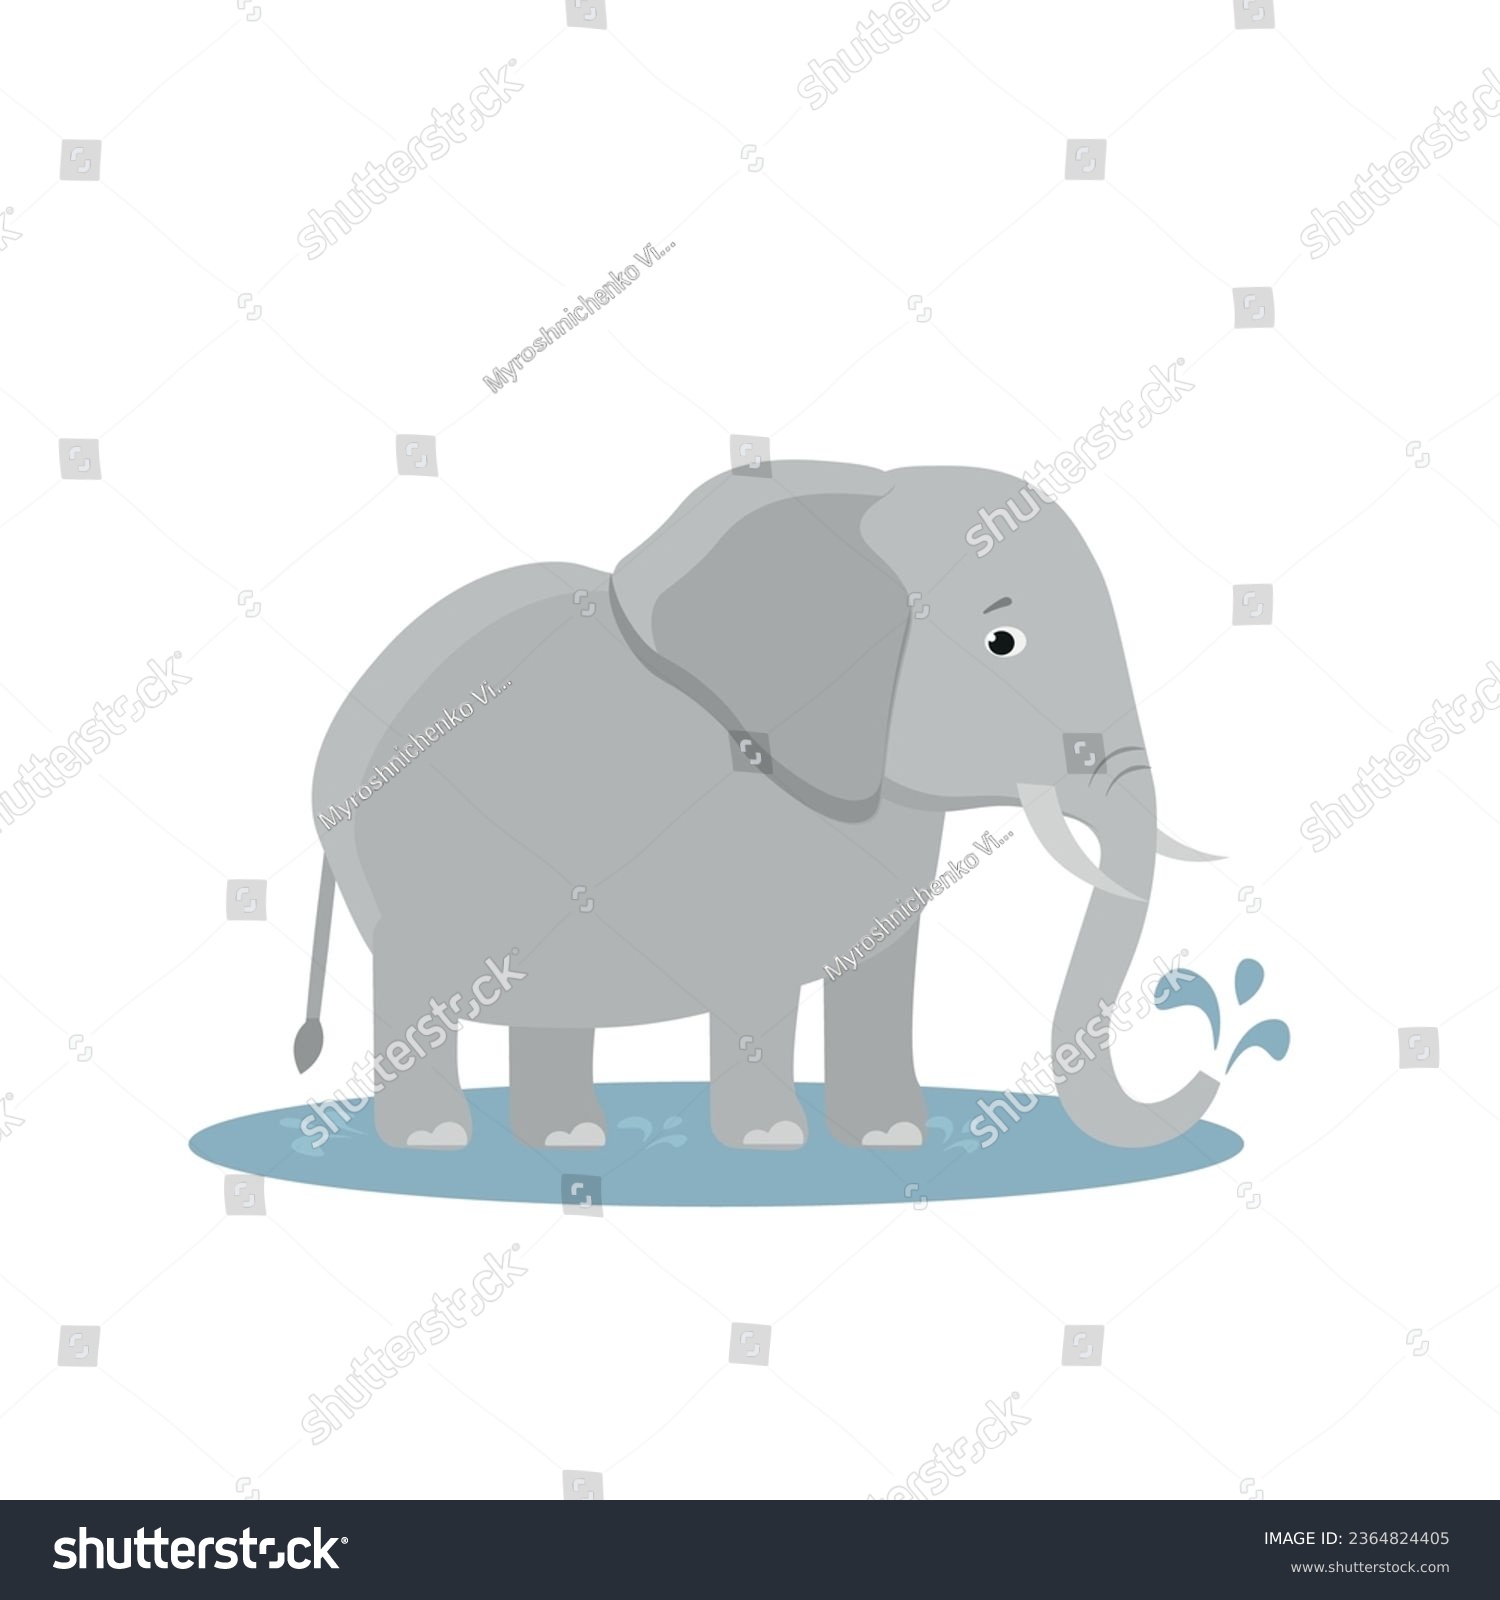 SVG of Vector elephant. Elephant in water. Vector flat illustration. Suitable for animation, using in web, apps, books, education projects. No transparency, solid colors only. Svg, lottie without bags. svg